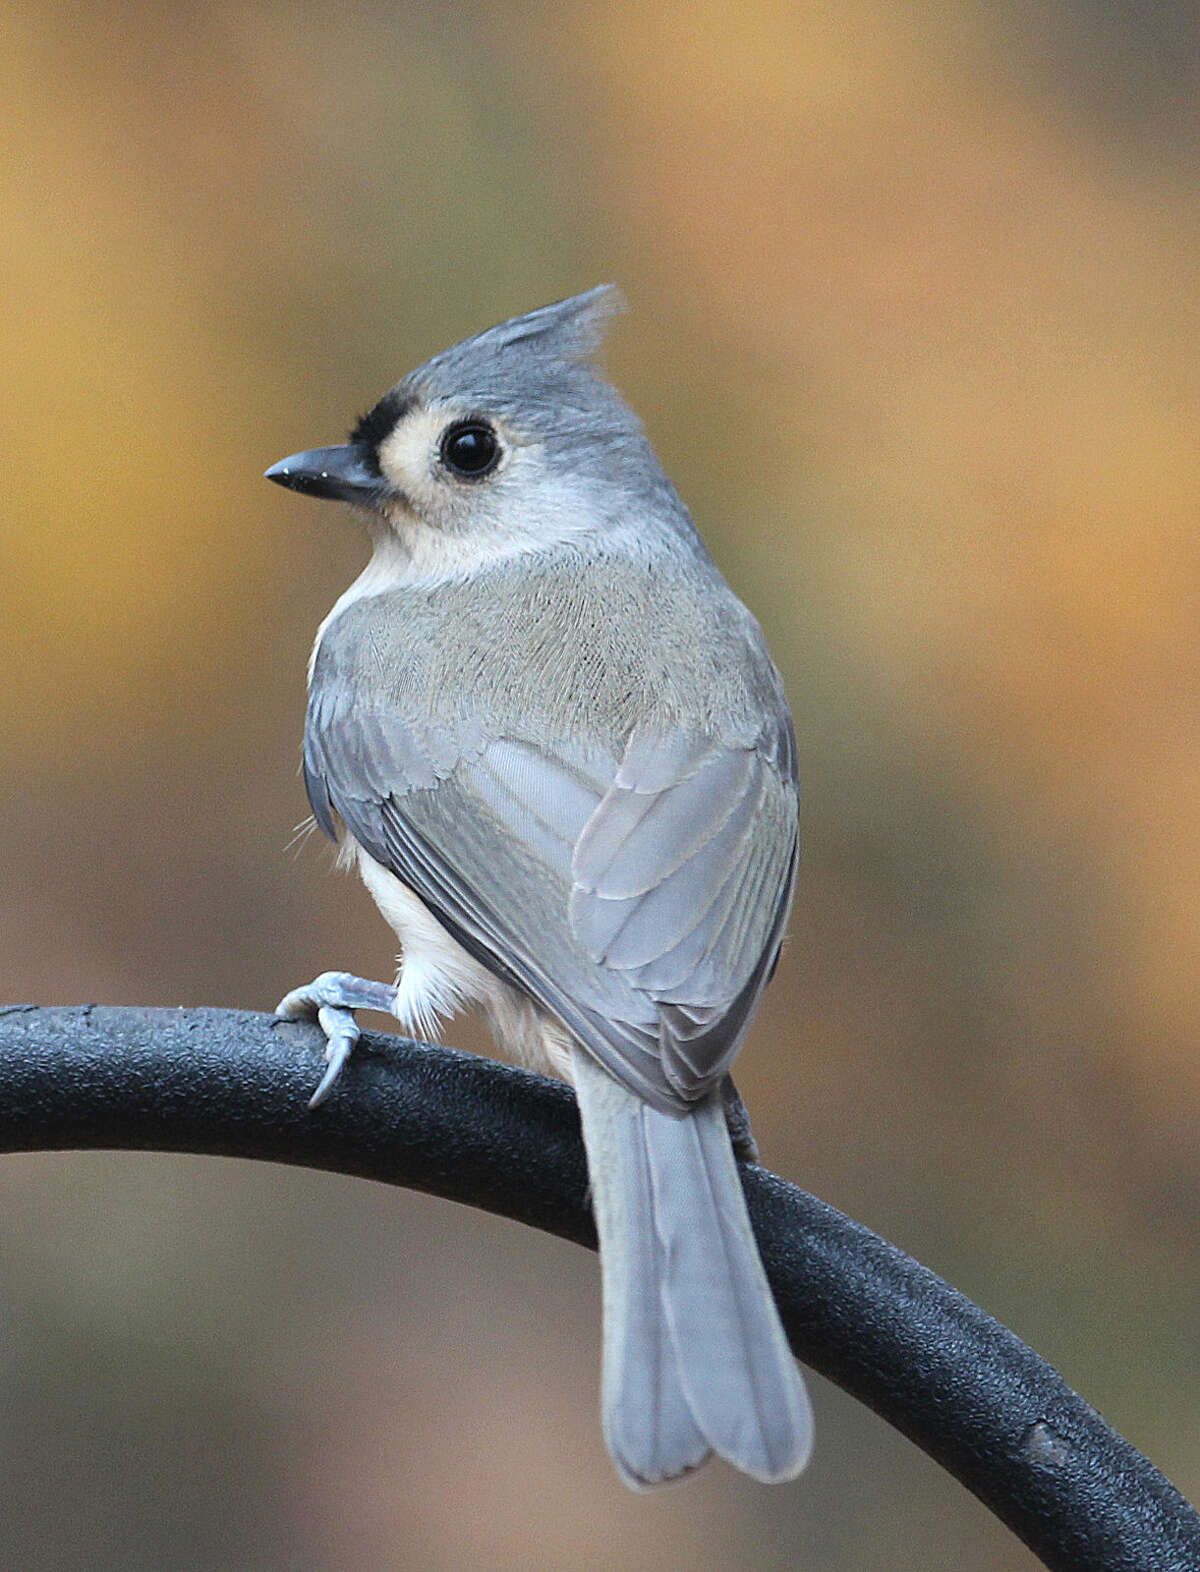 Photo by Chris Bosak A Tufted Titmouse perches near a feeding station in New England, fall 2015.